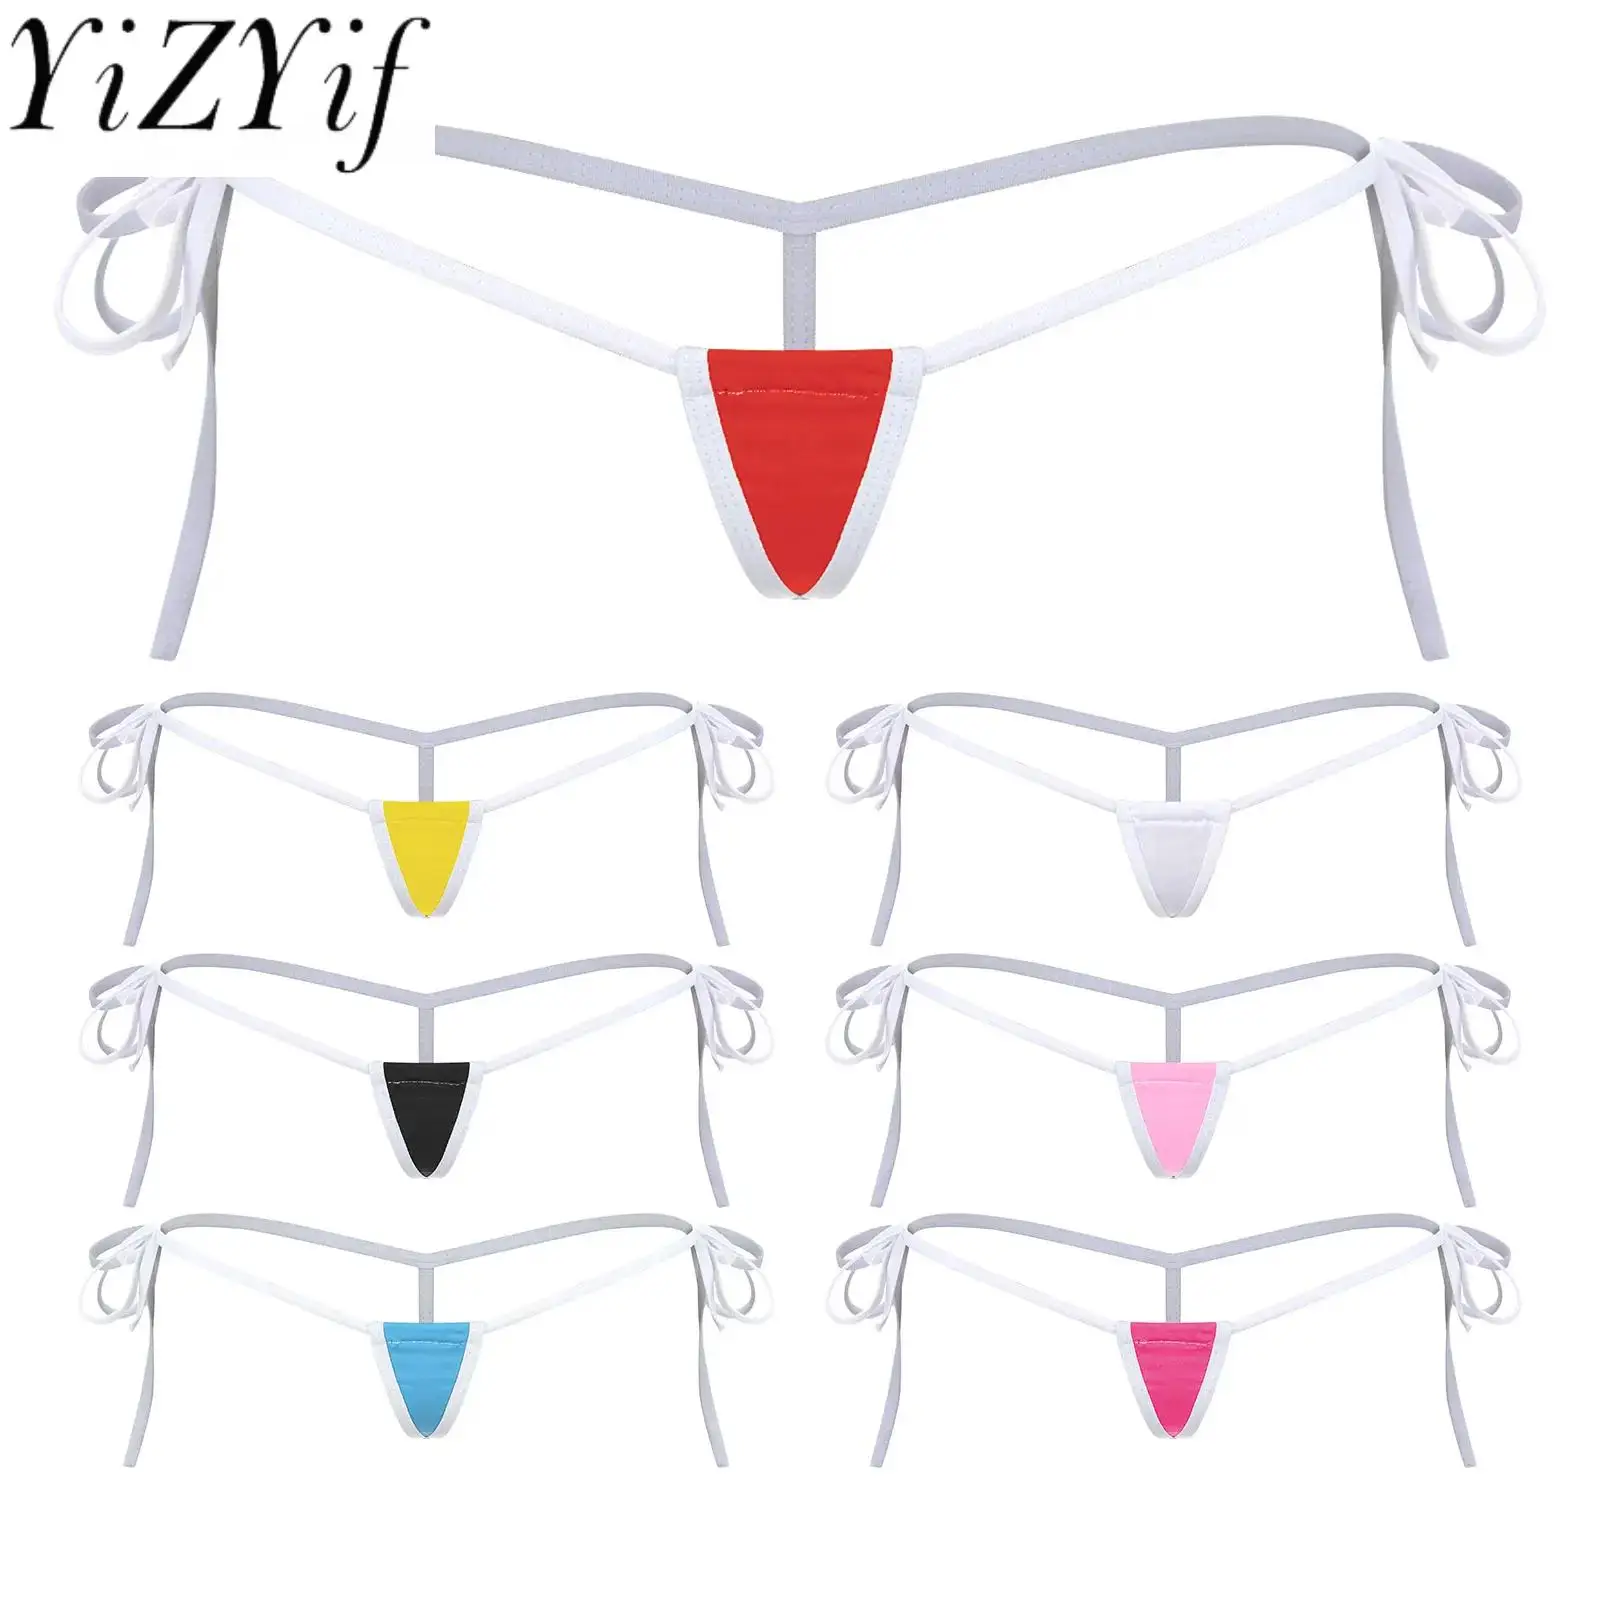 Womens Contrast Color T-back Adjustable Lace-up G-string Low Rise Thong Micro Bikini Underwear for Vacation Beach Sunbathing